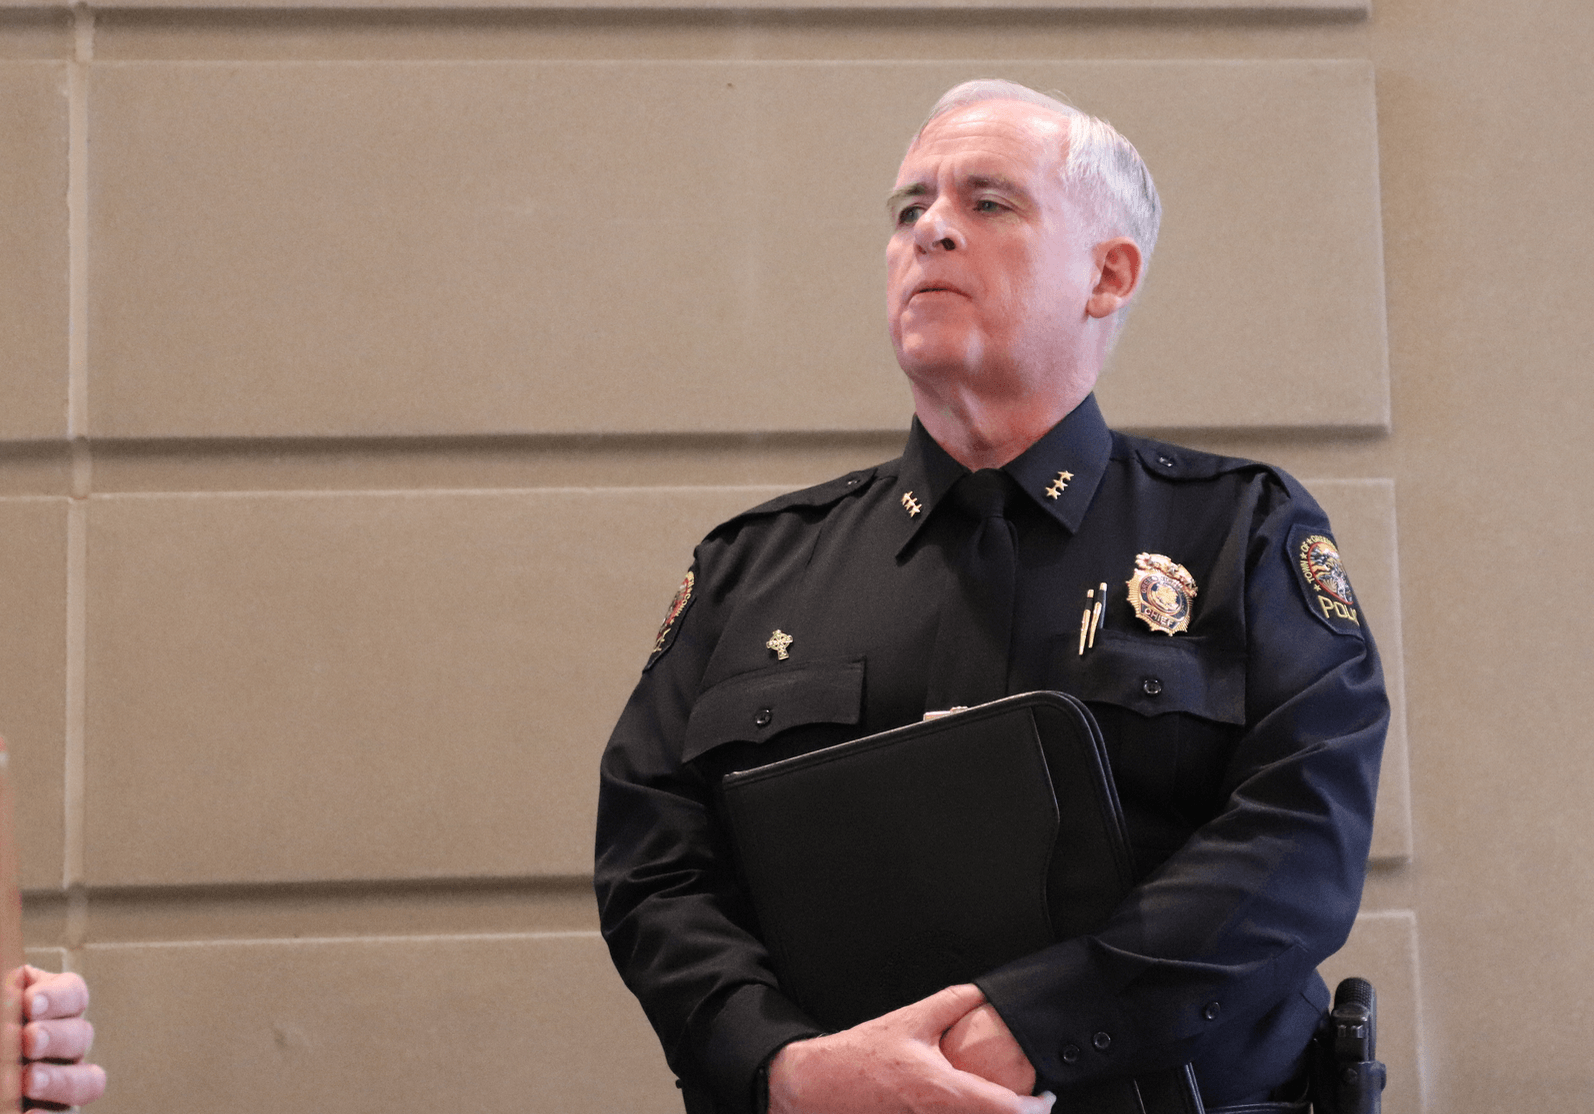 Greenwich Police Dept Chief James Heavey participated in a press conference at the Public Safety Complex. March 17, 2020 Photo: Leslie Yager